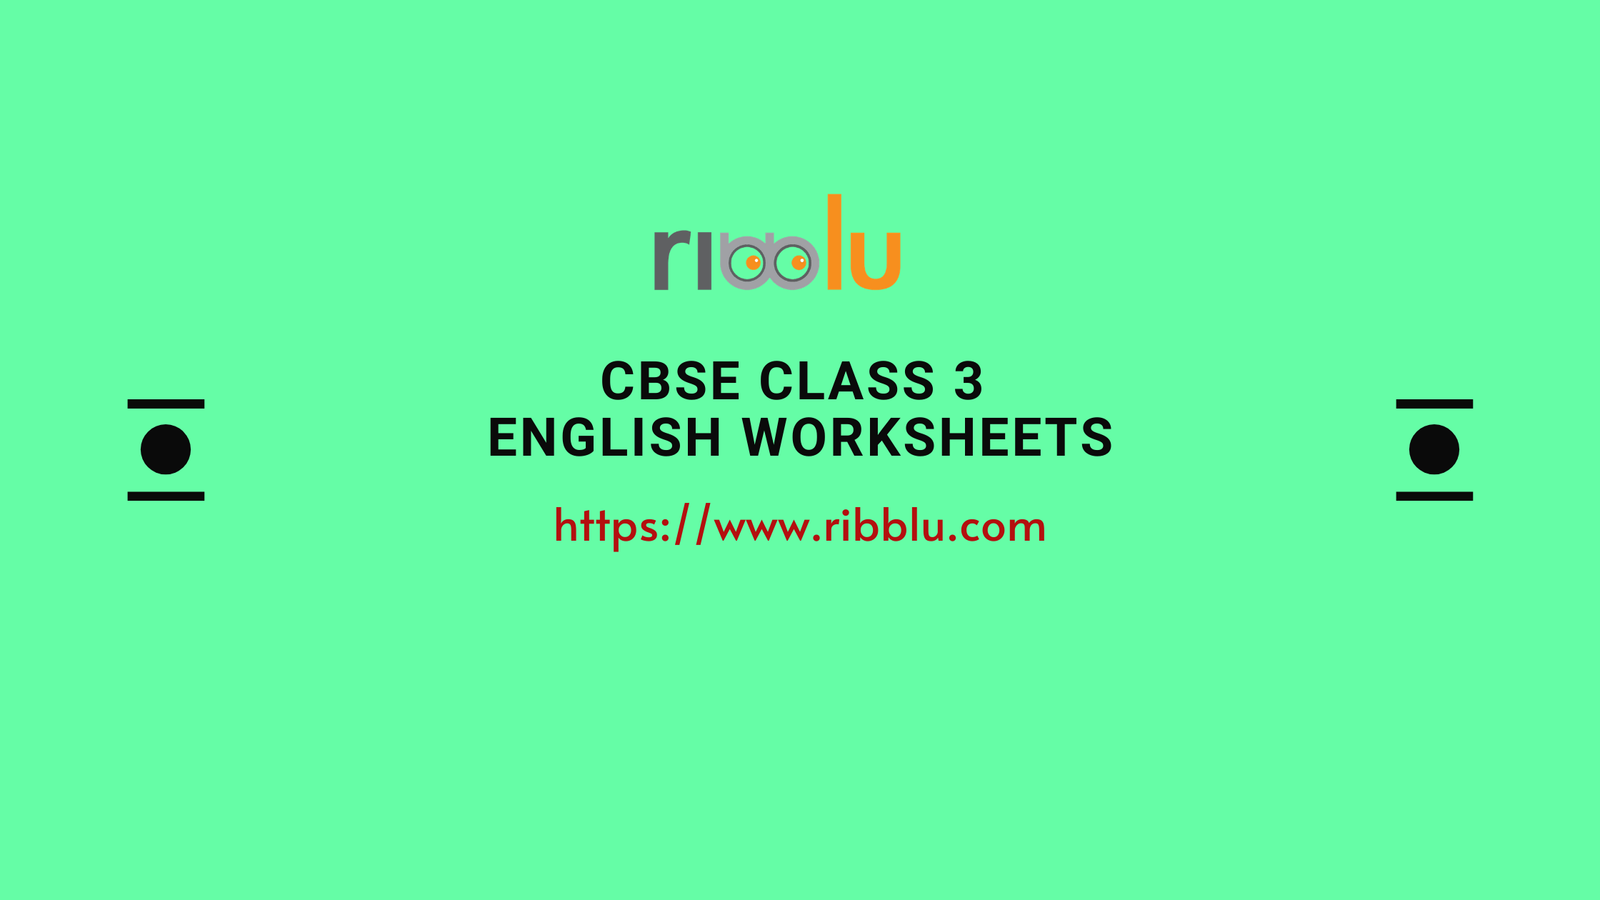 cbse-class-3-english-worksheets-for-free-in-pdf-format